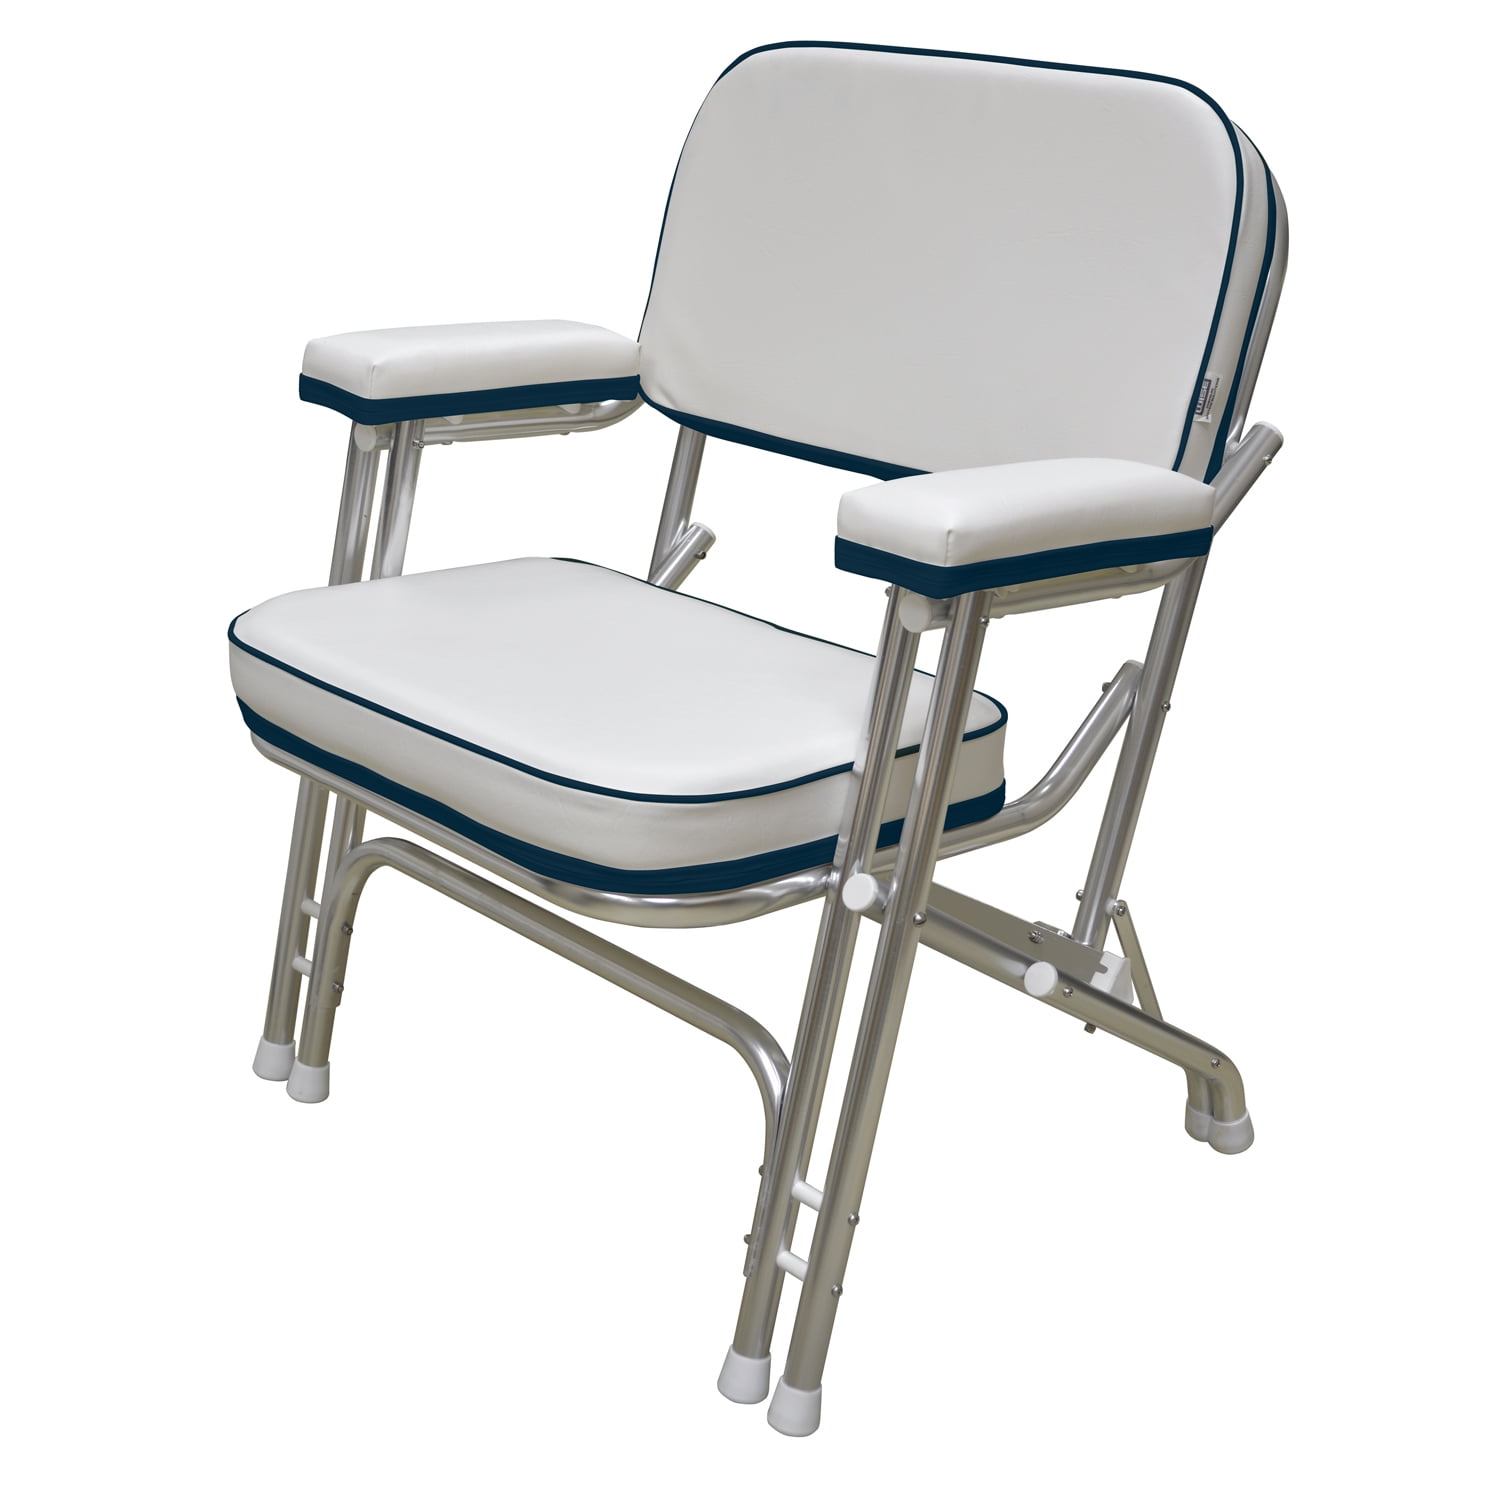 Wise 8WD120AB-924 Folding Deck Chair with Aluminum Frame, White / Navy